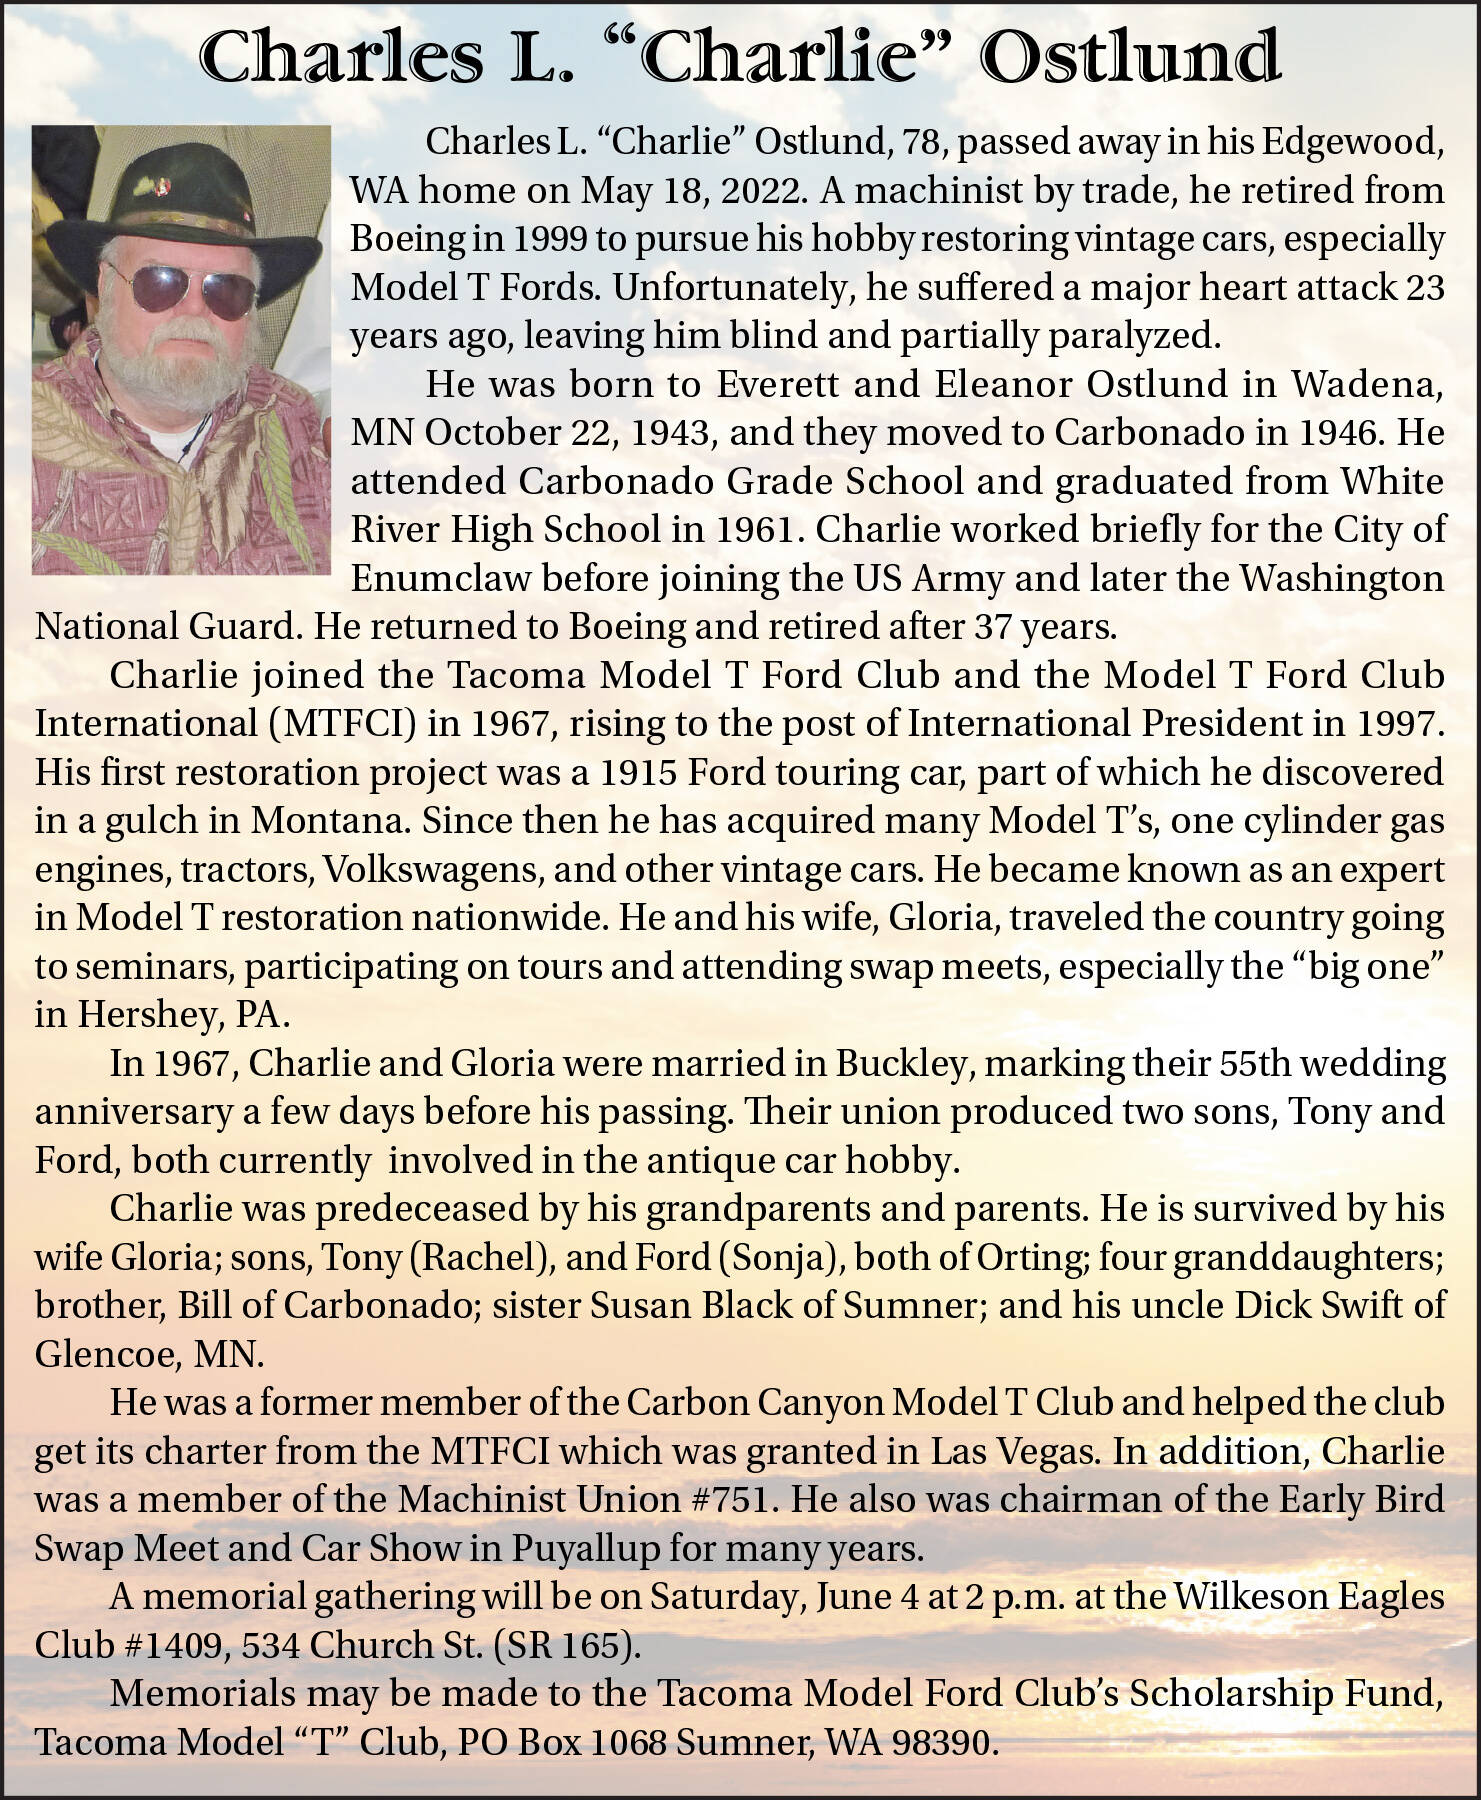 Charles L. “Charlie” Ostlund died on May 18, 2022 at the age of 78.